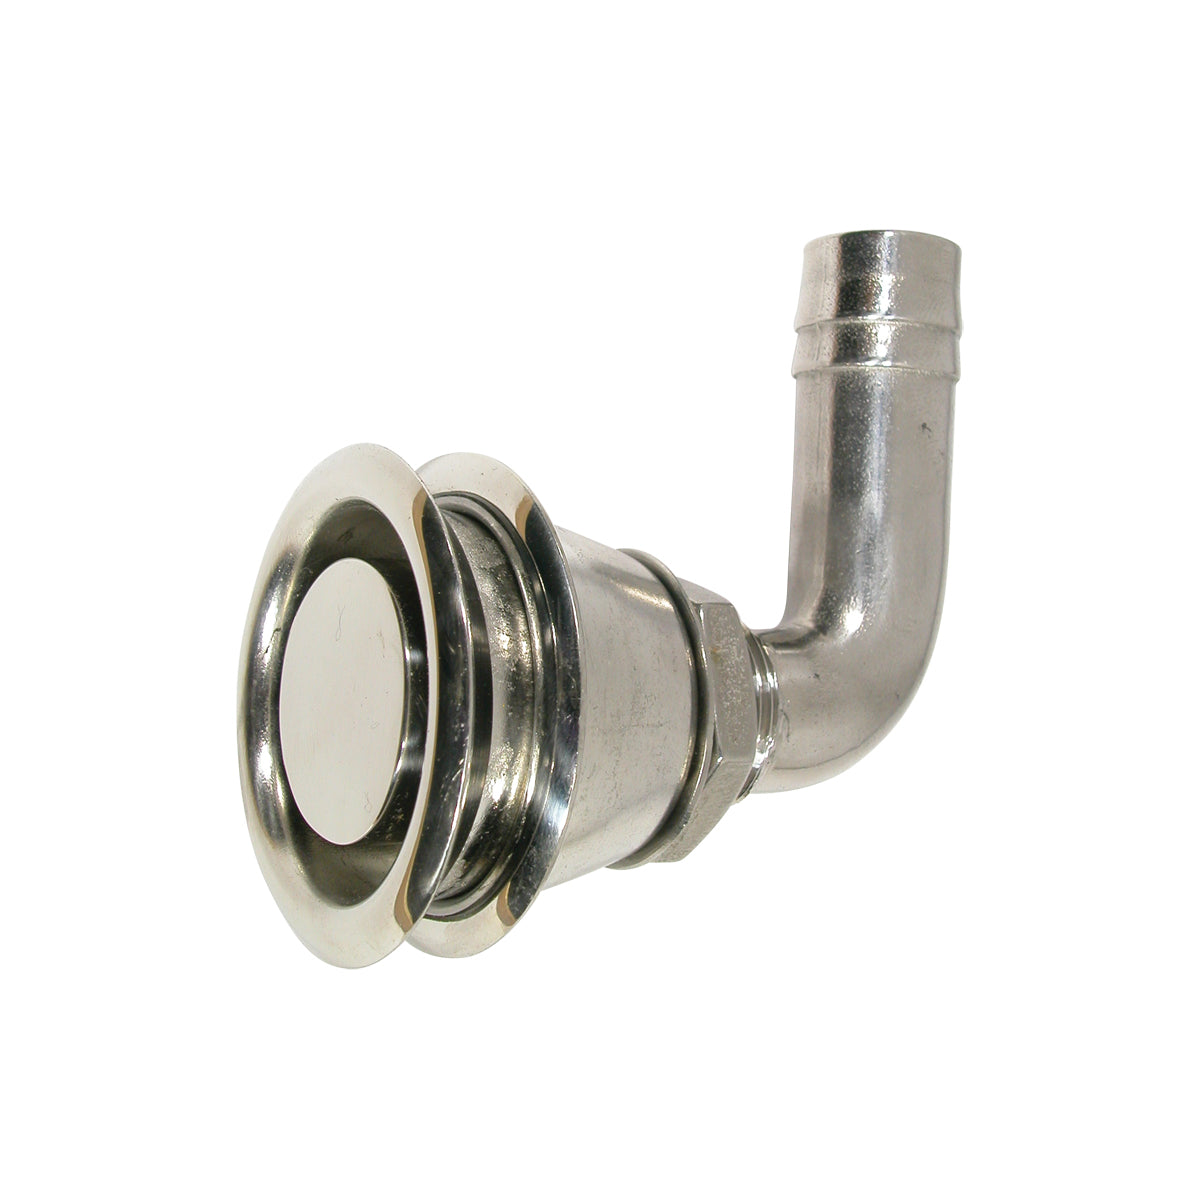 Marine Town® Fuel Breathers – Recessed Stainless Steel